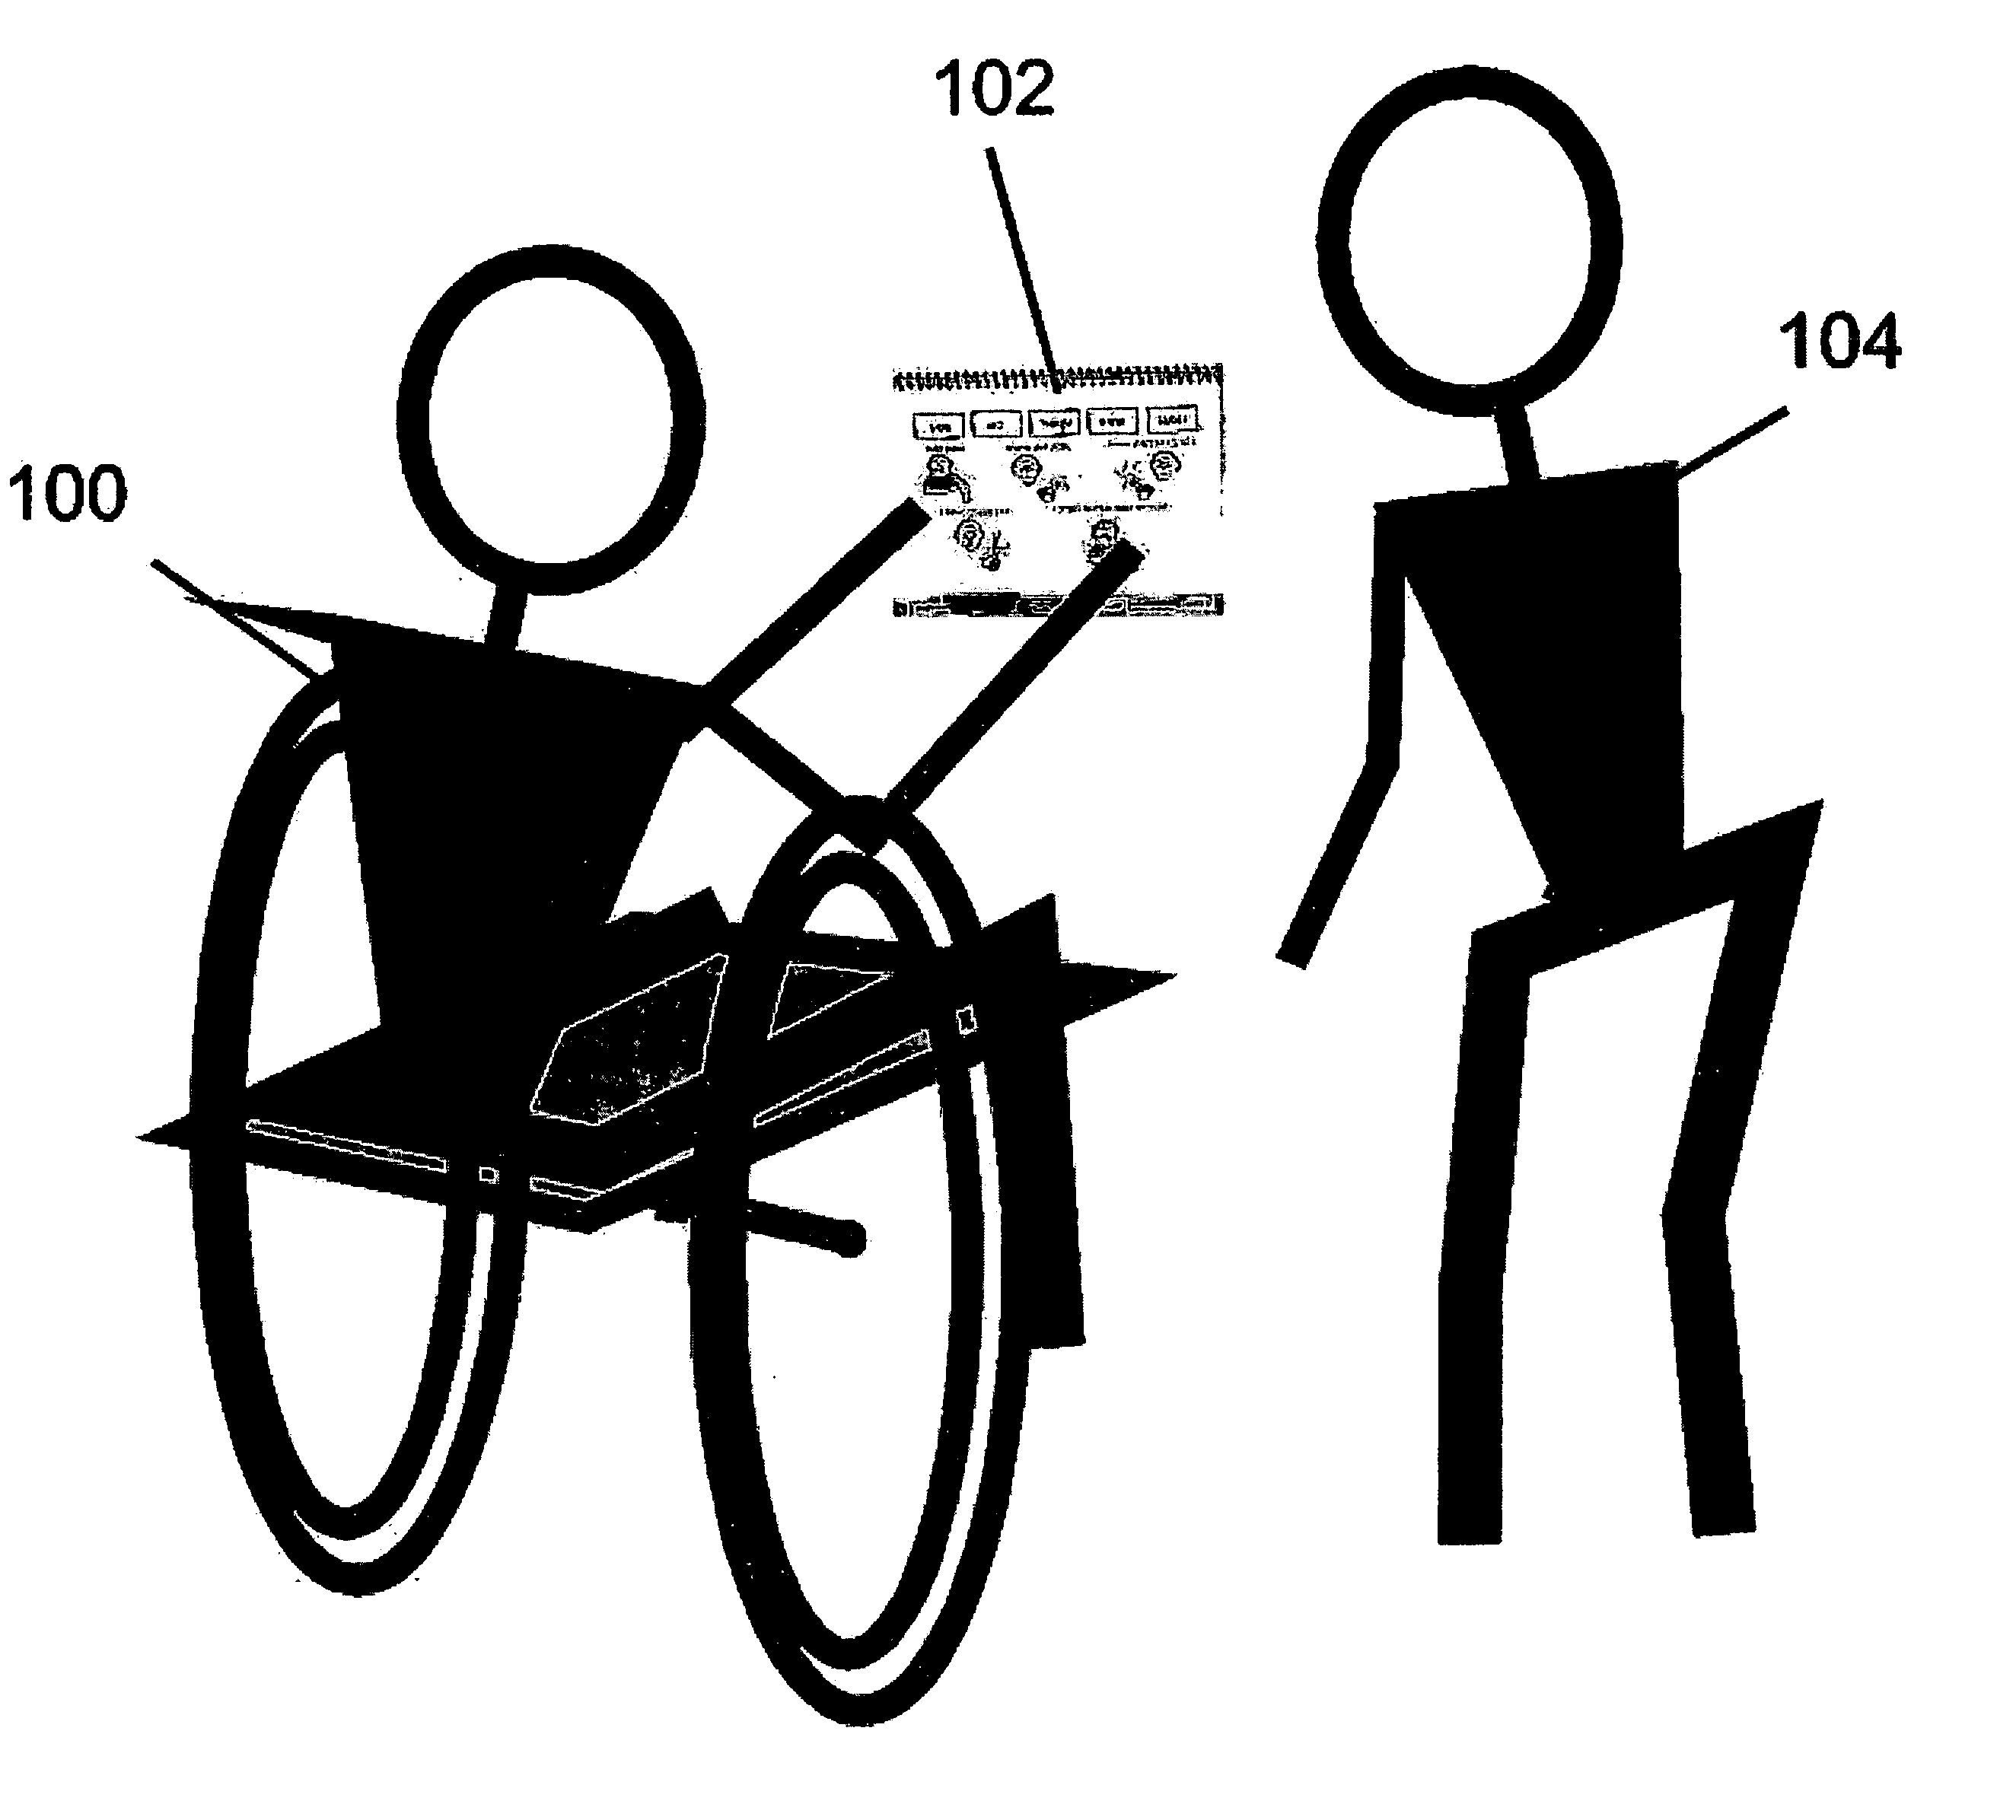 Apparatus for presenting a hierarchically and thematically arranged plurality of concisely annotated pictograms for facilitating communication without speech